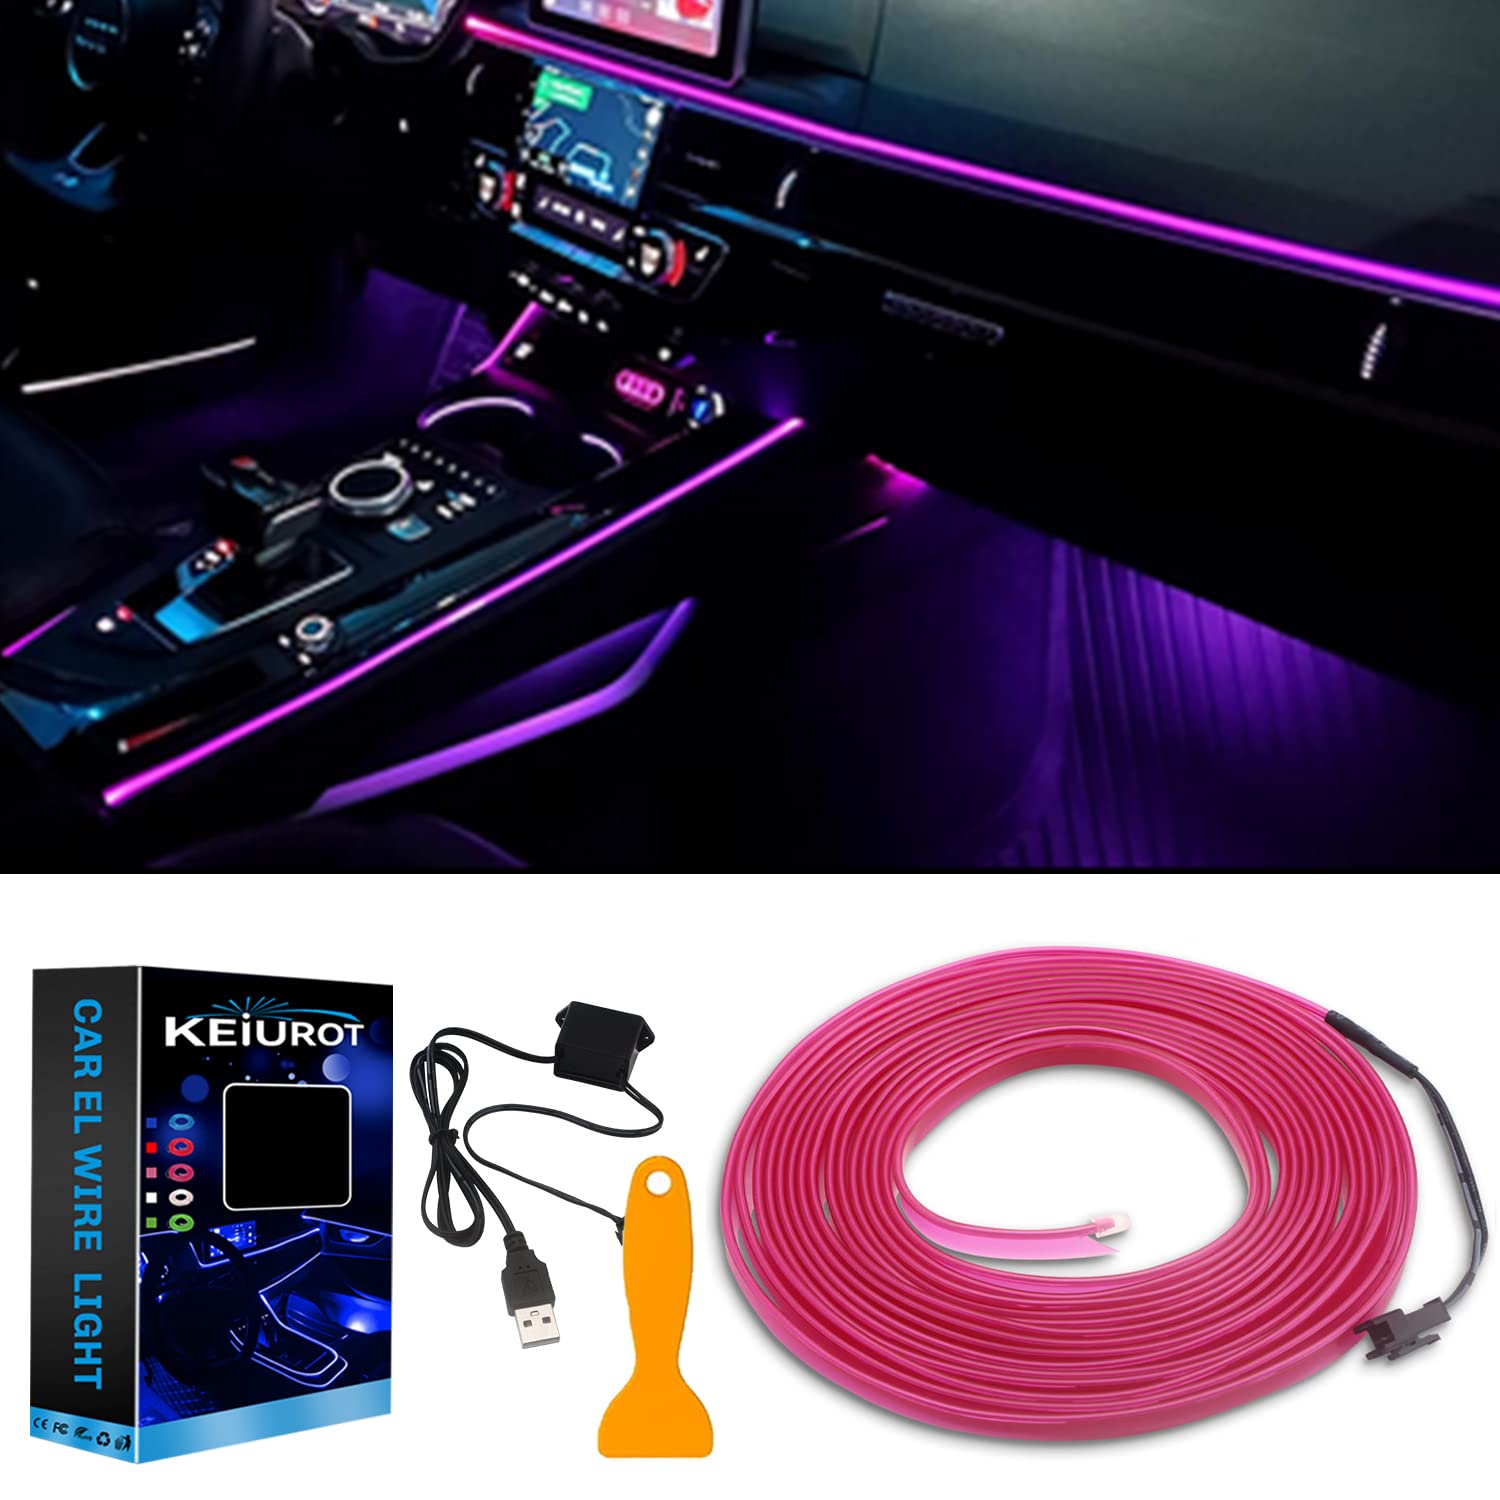 Keiurot El Wire Car Lights USB Neon Light for Car Purple 5M/16Ft Car Ambient Lighting Atmosphere Car Led Interior Strip Light Sewing Edge Decoration Dashboard Lights Strip Car Trim Led Lighting von Keiurot